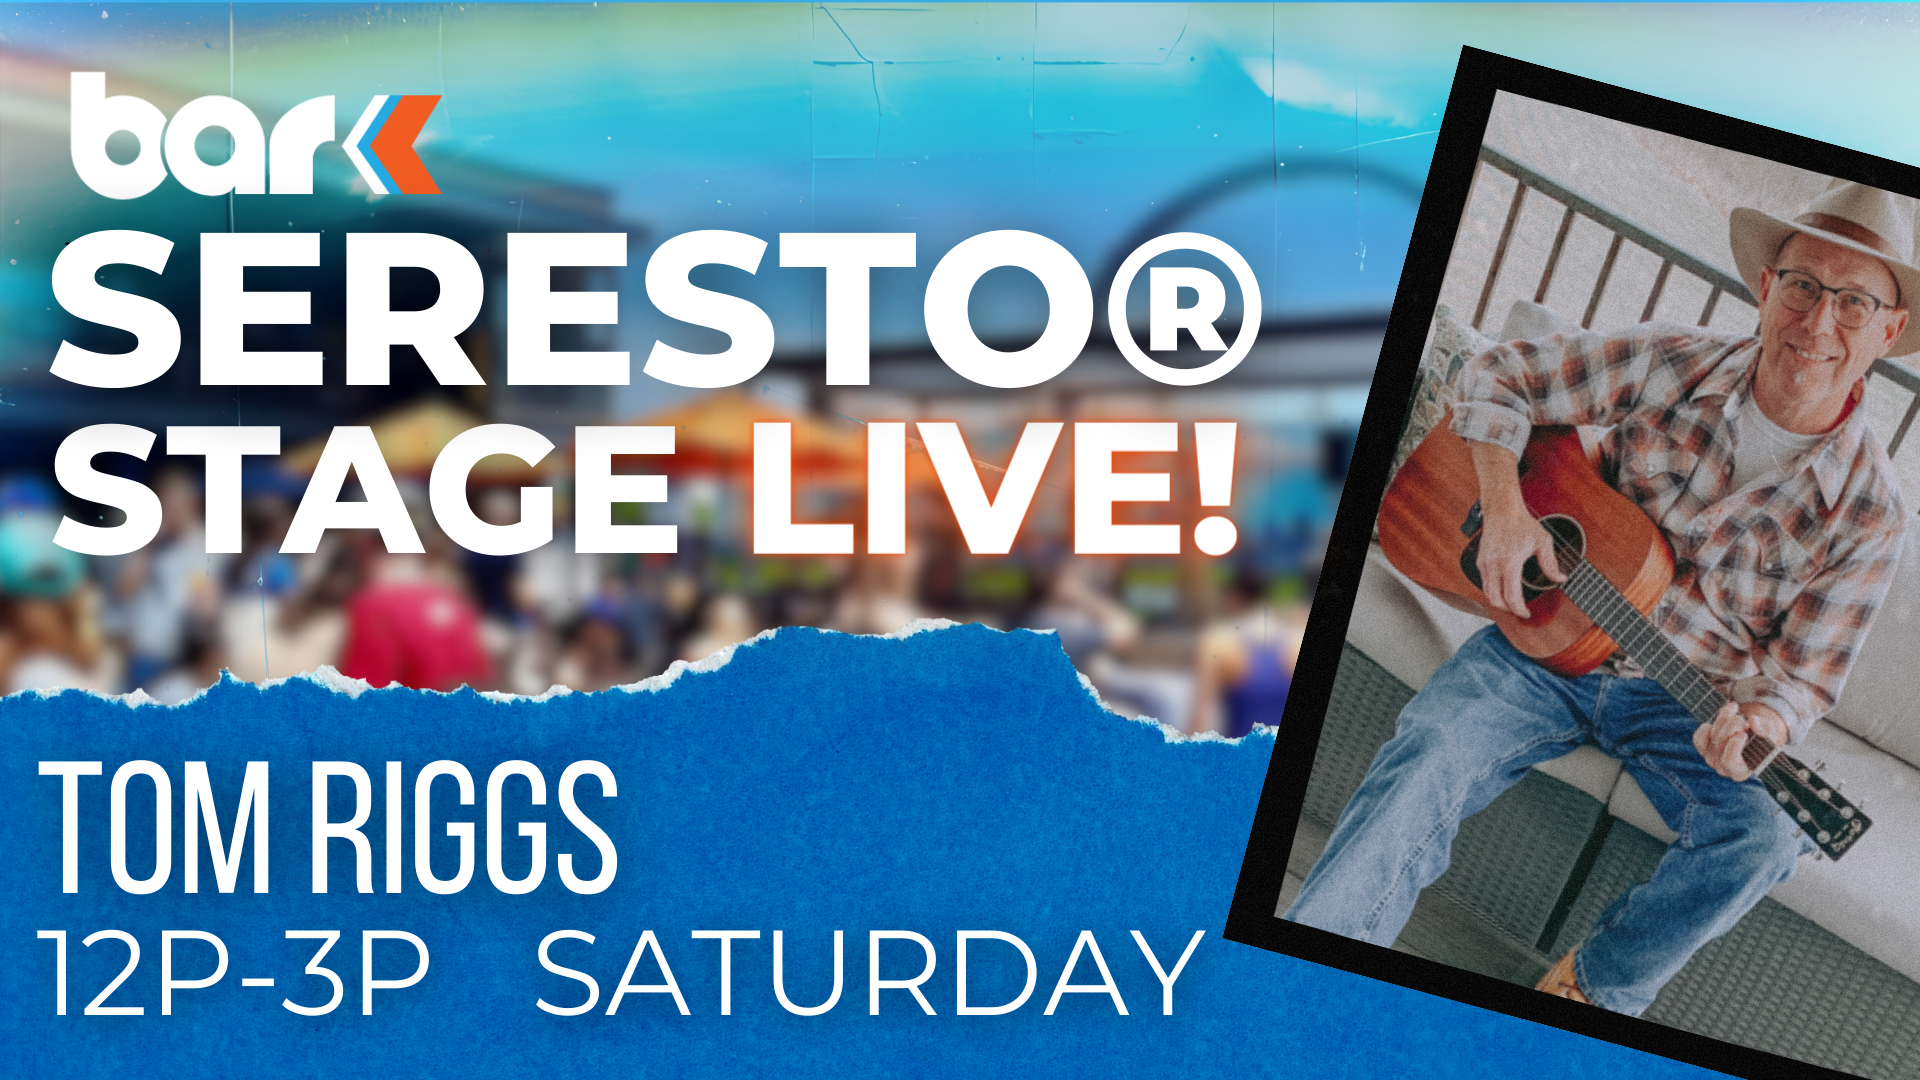 Man in denim and cowboy hat posing with a guitar Text - Bar K Seresto Stage Live! Tom Riggs 12pm to 3 pm Saturday